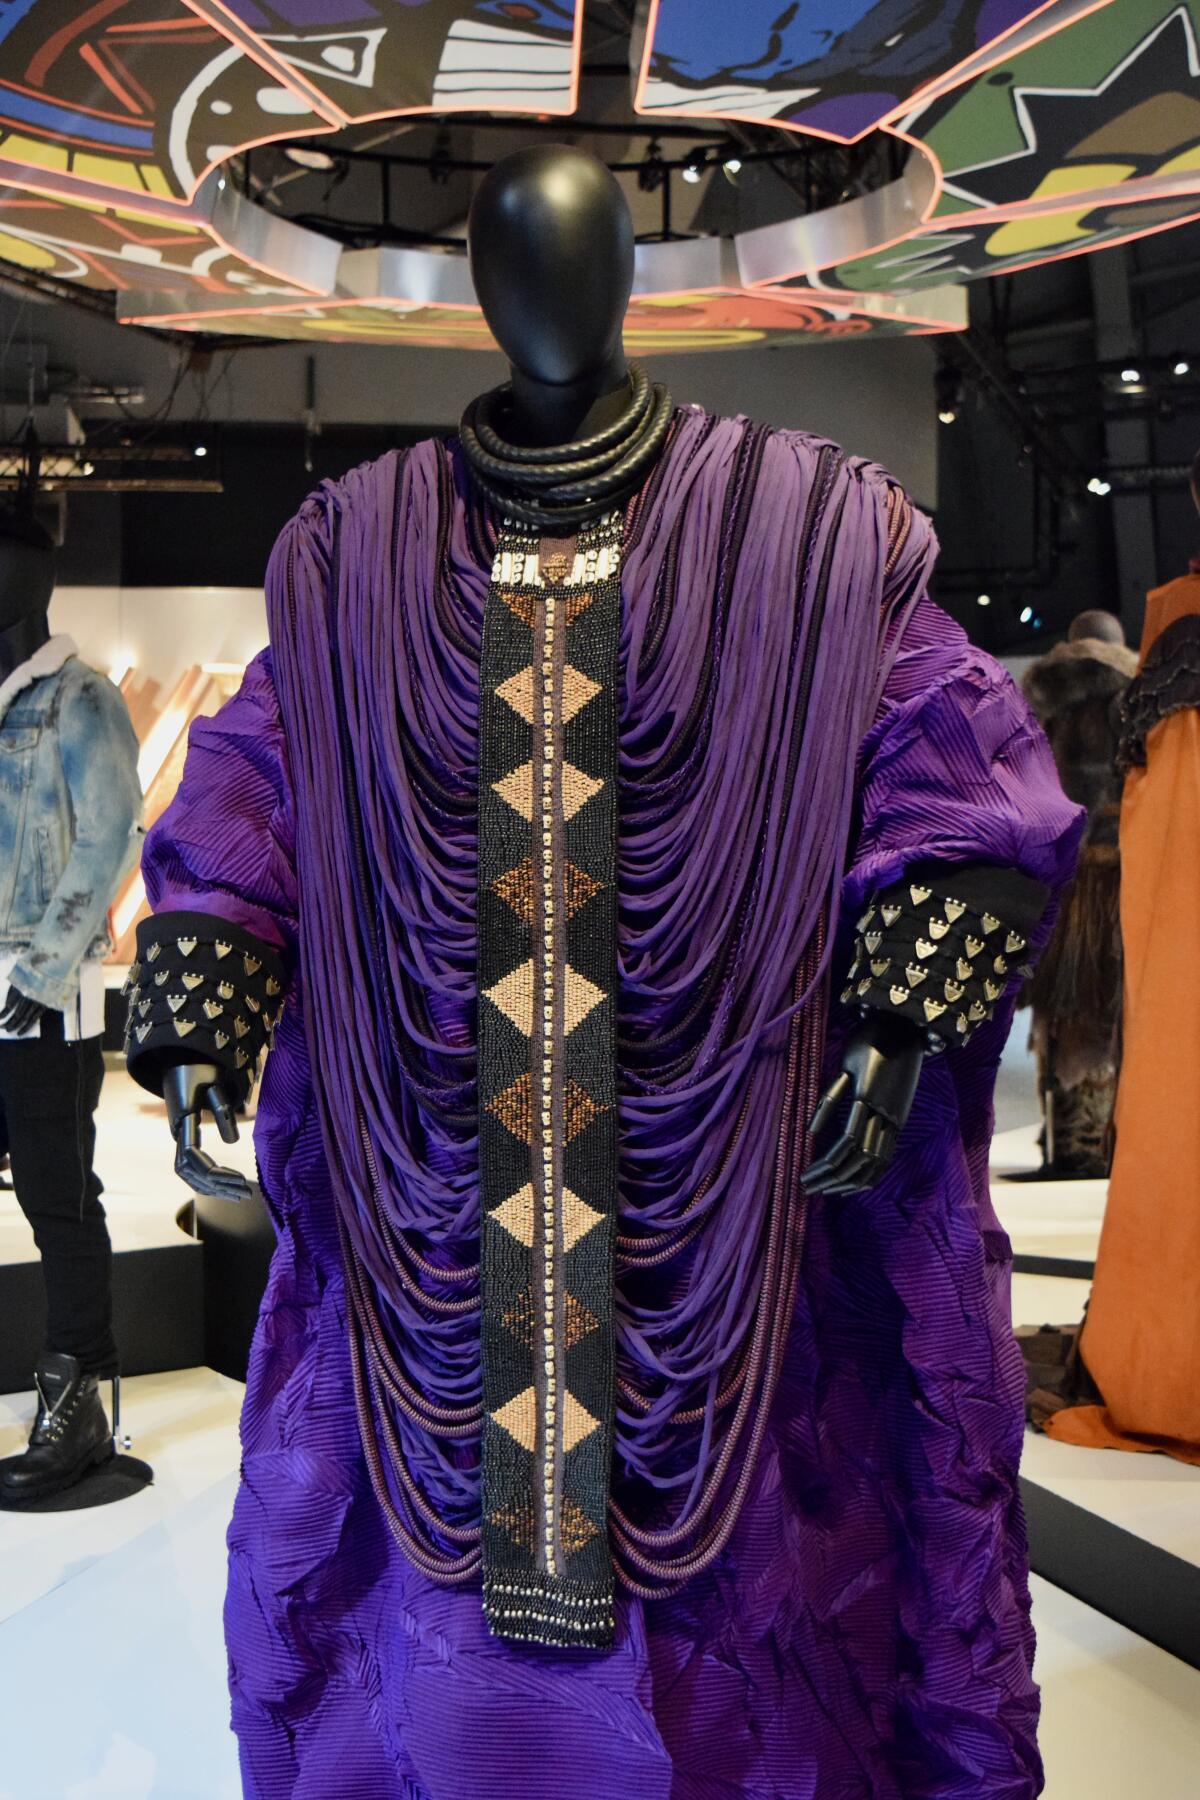 A big flowing purple costume with many please and golden buttons from a costume design exhibit.